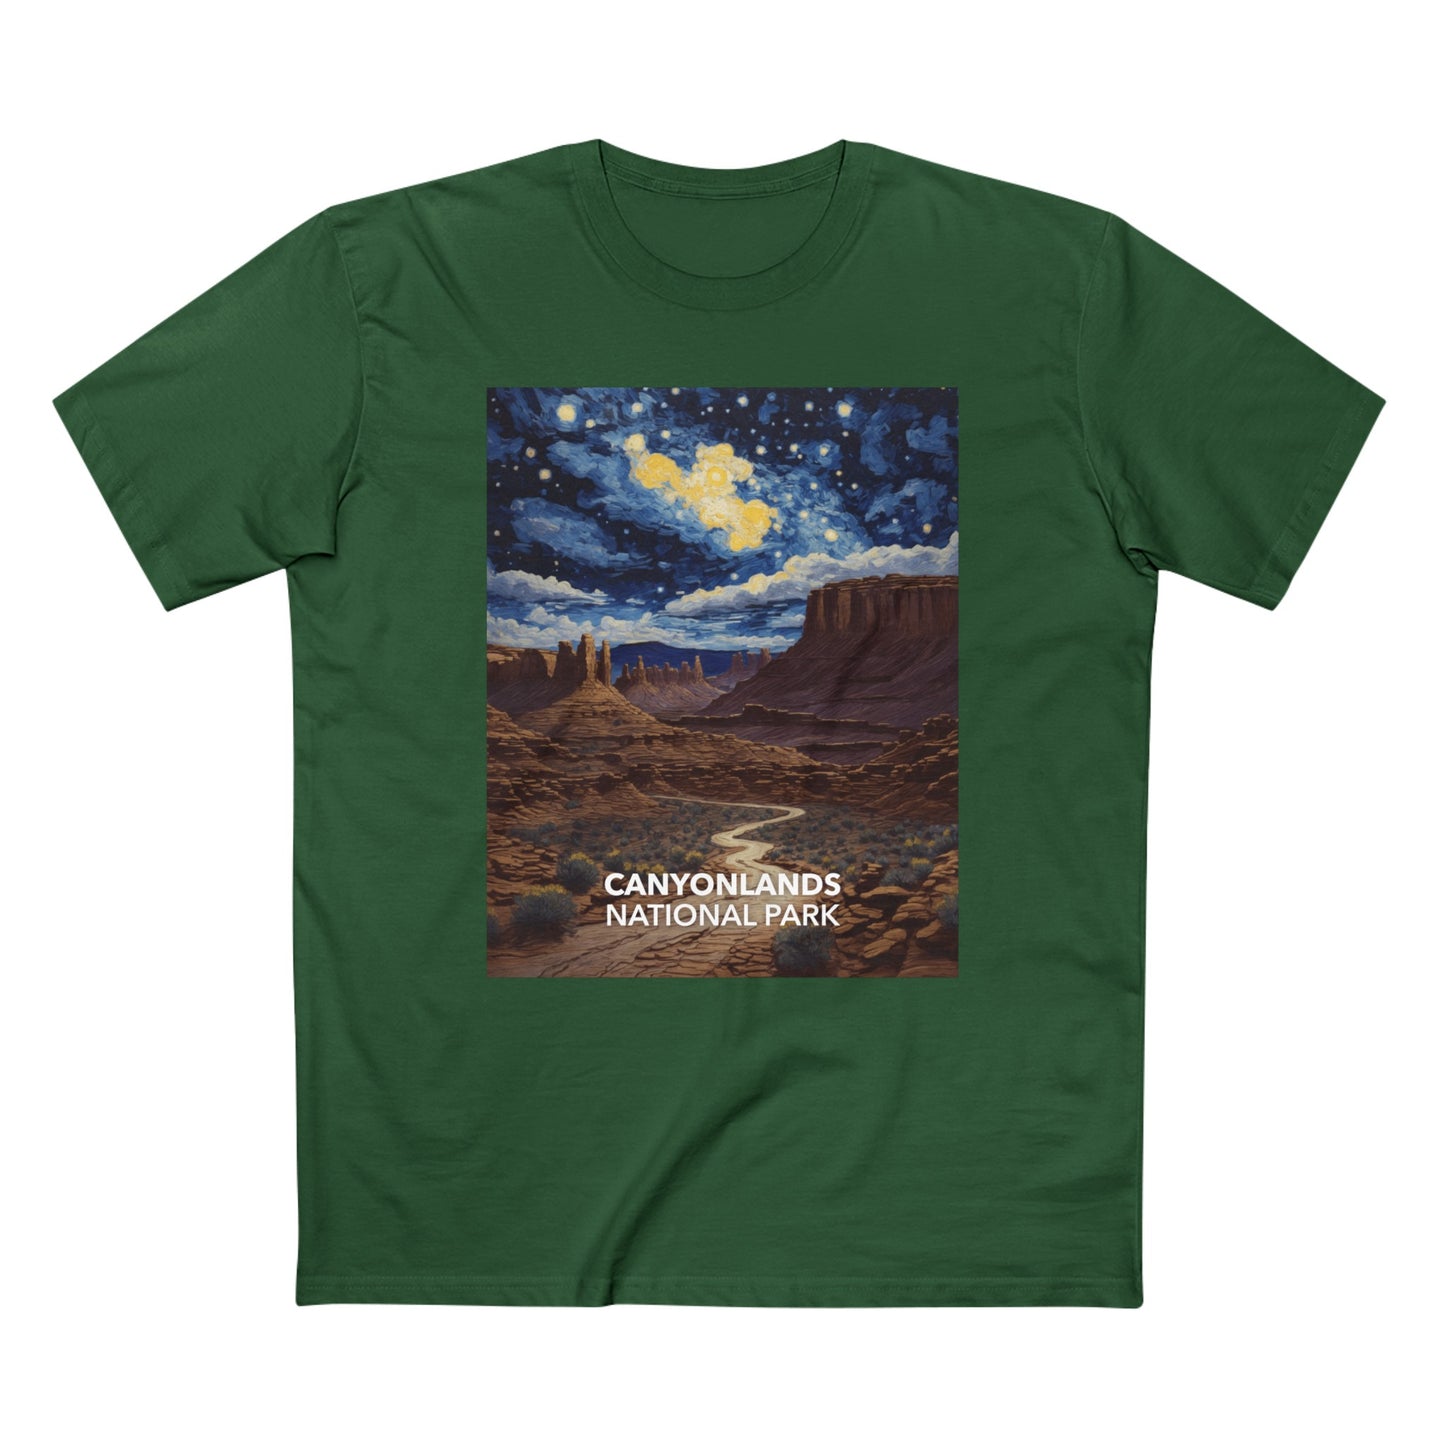 Canyonlands National Park T-Shirt - The Starry Night